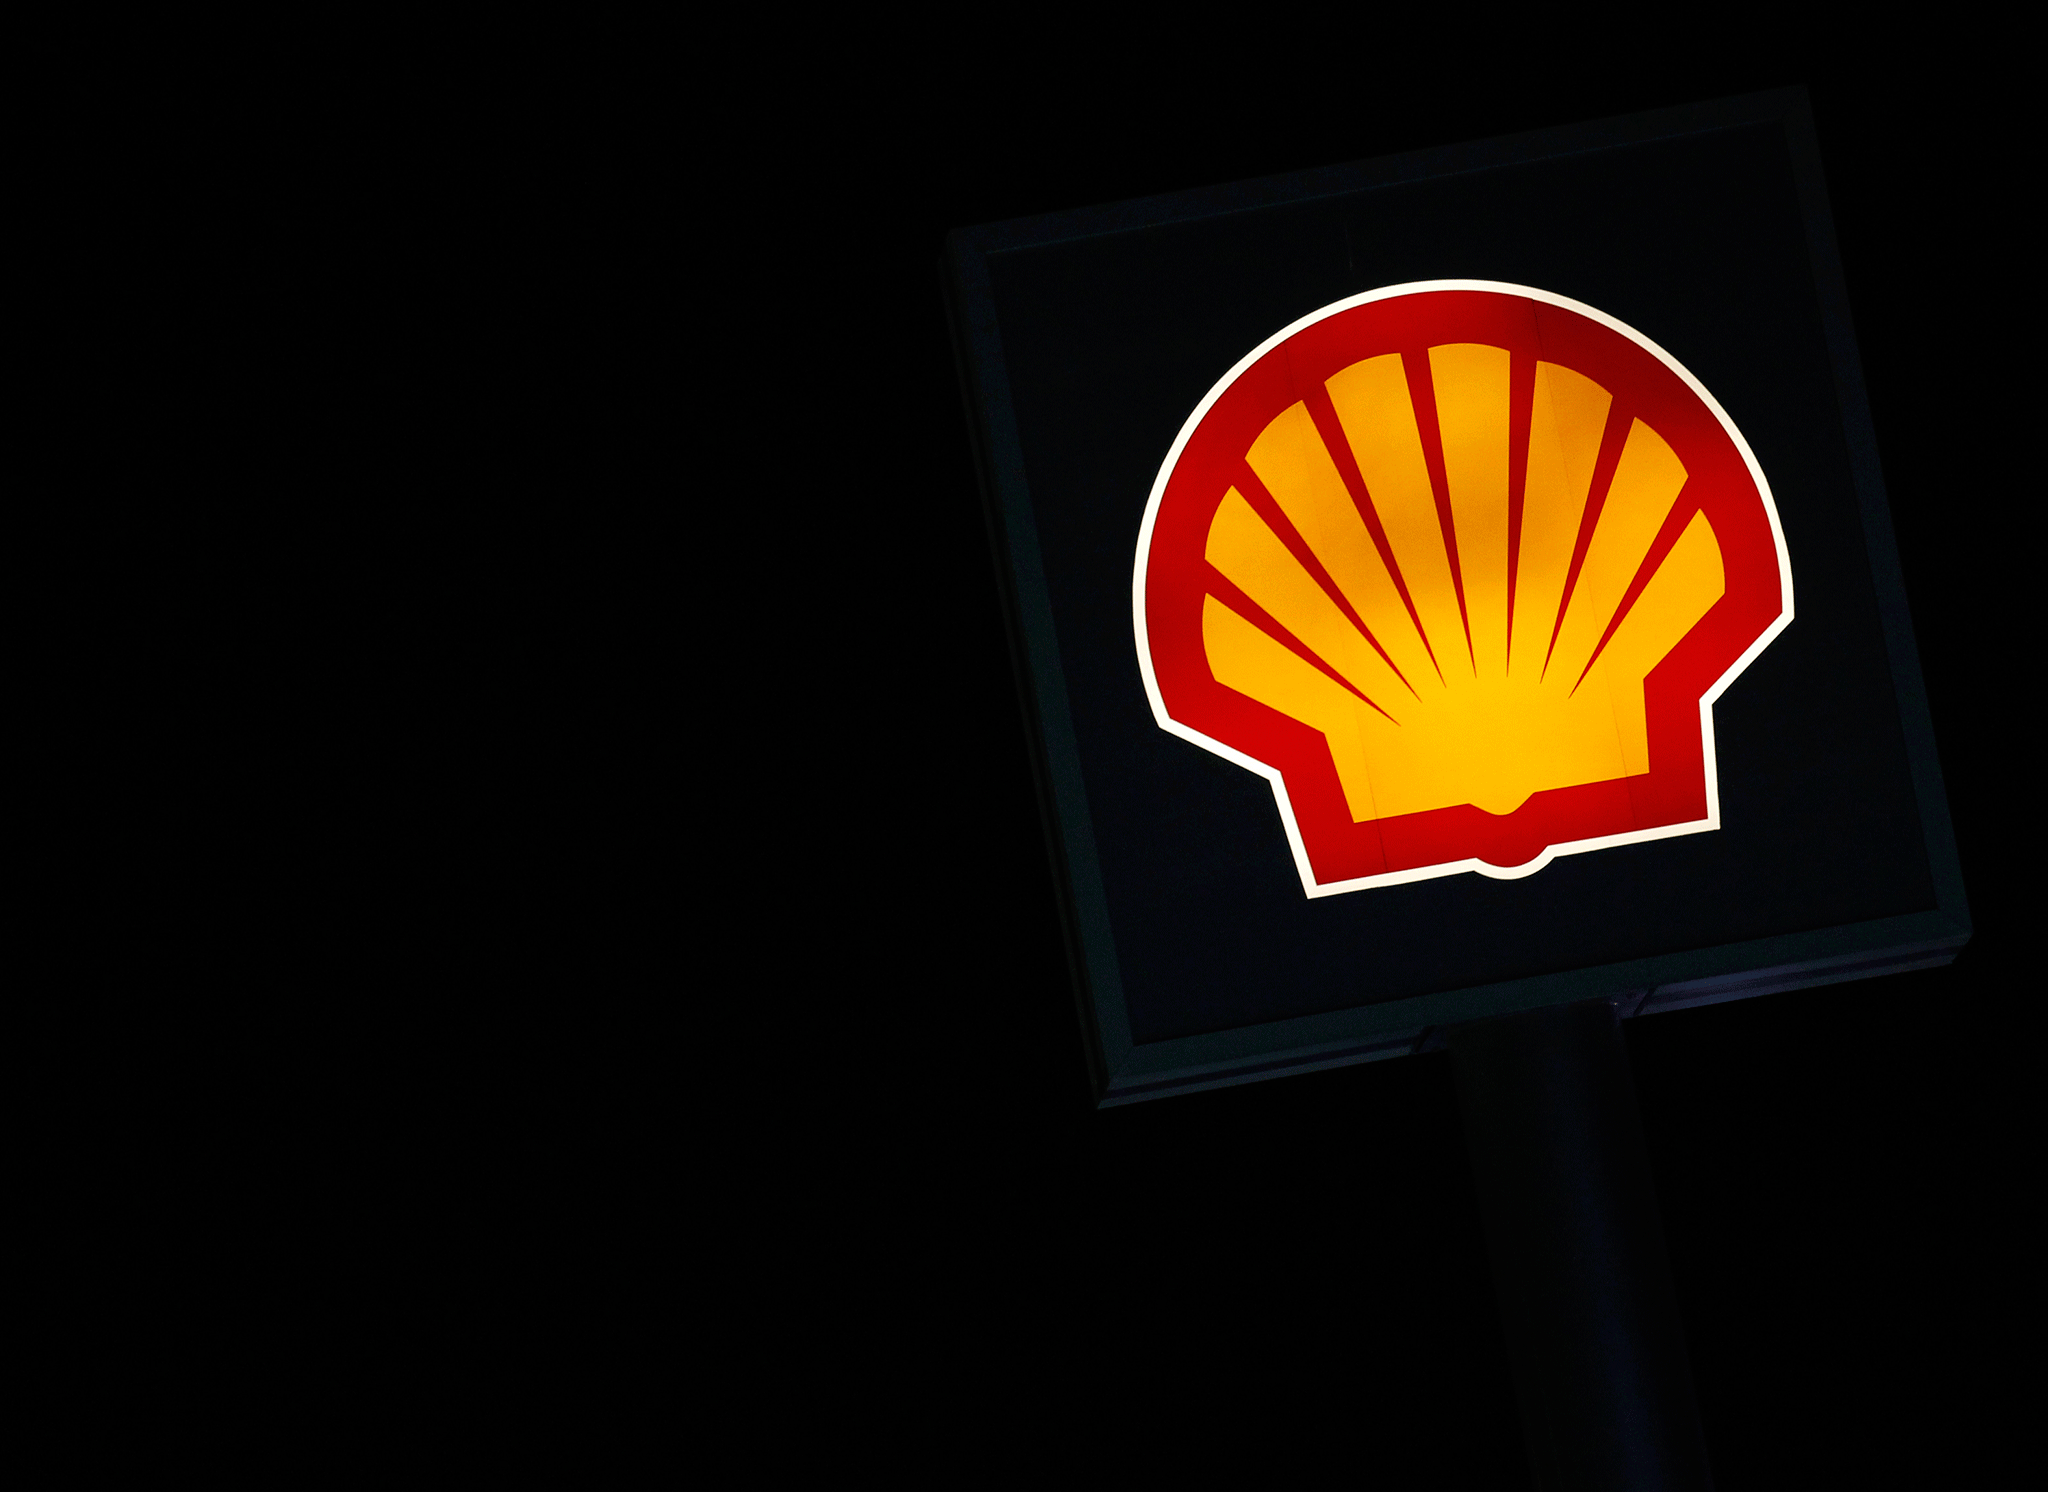 Shell enters the UK energy market with First Utility deal